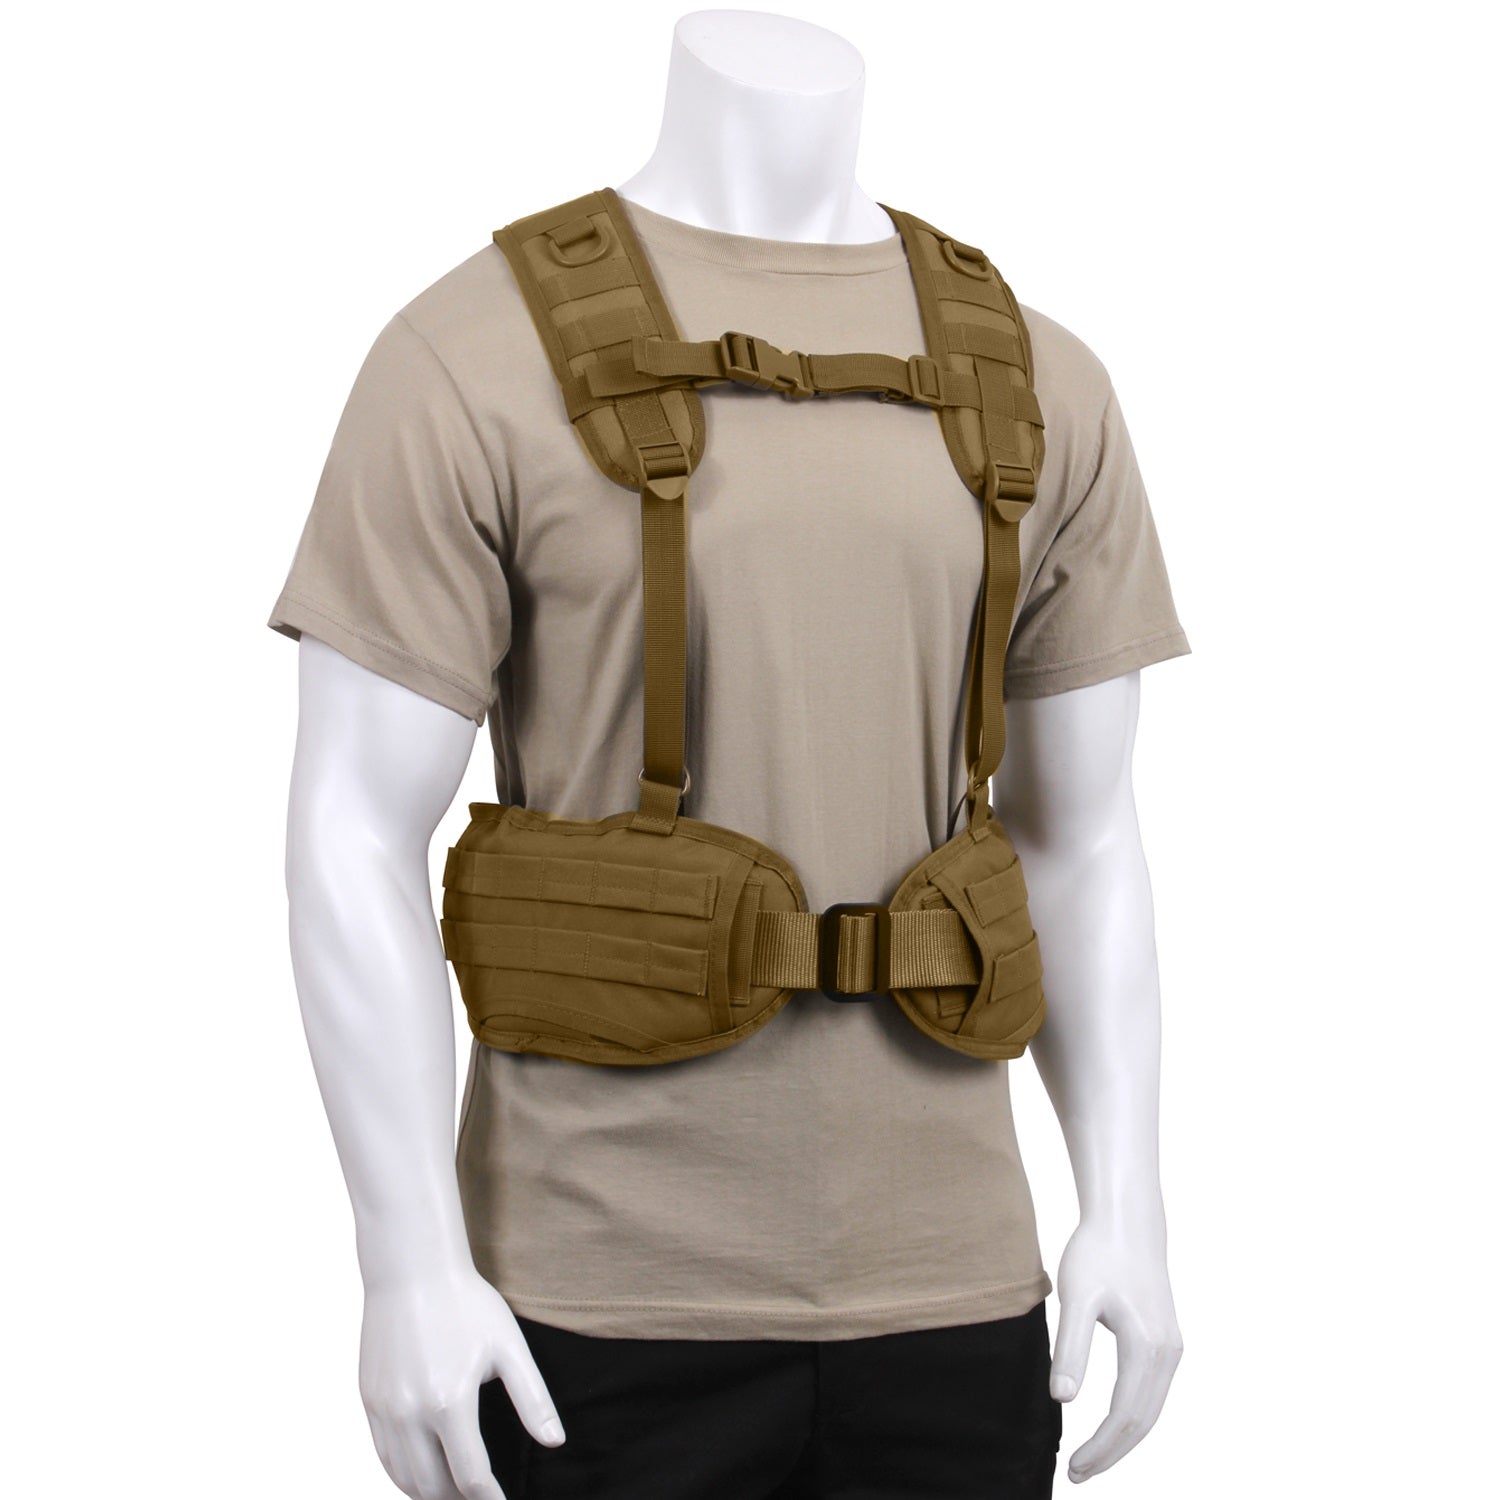 Rothco Battle Harness Coyote Brown